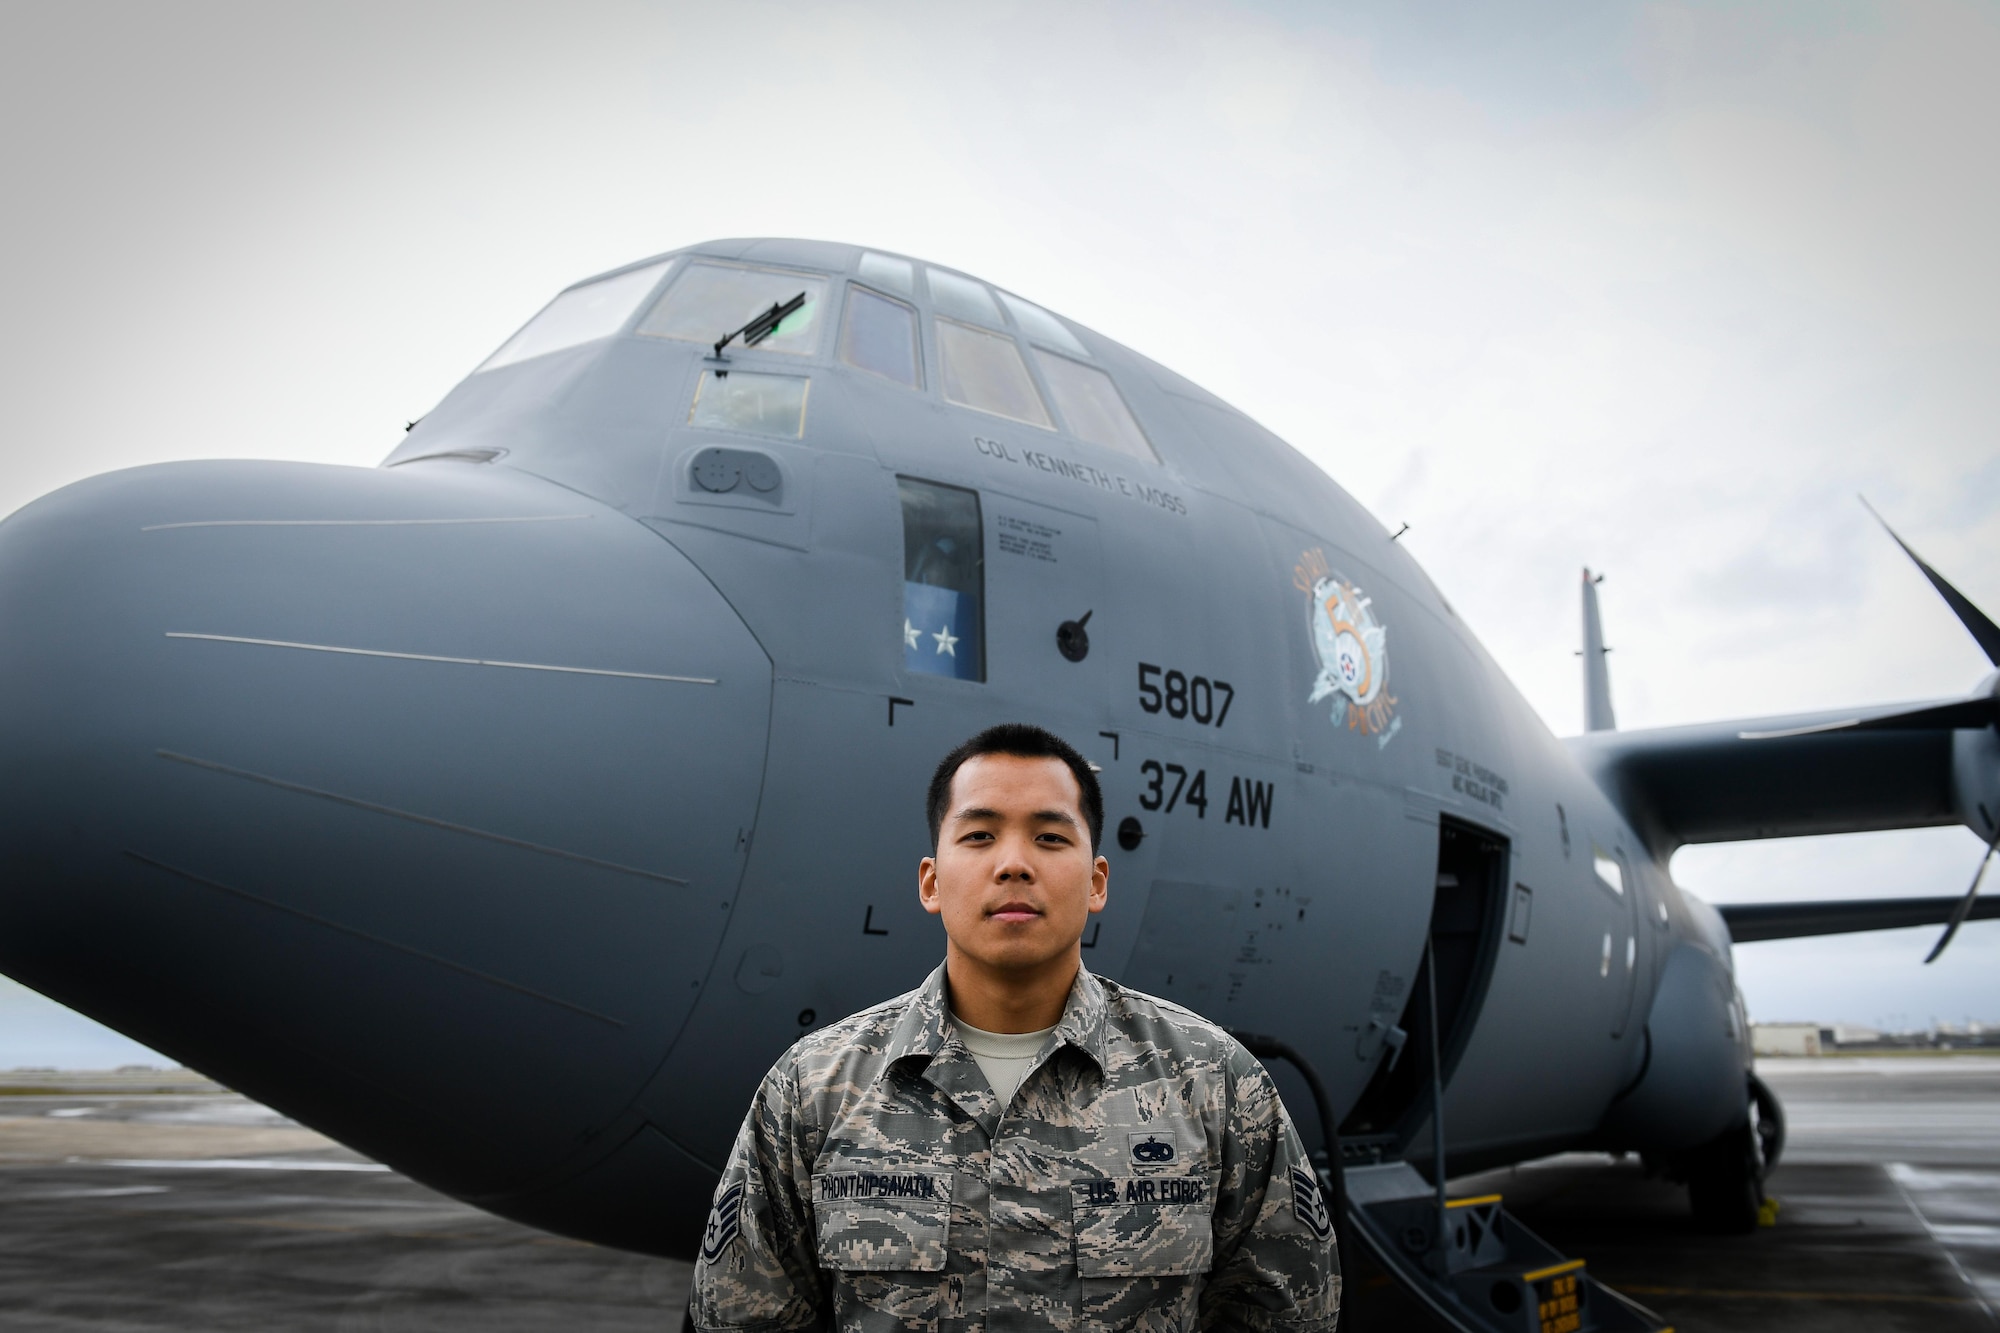 Staff Sgt. Gene Phonthipsavath, 374th Aircraft Maintenance Squadron dedicated crew chief,  poses for a photo in front of a C-130J Super Hercules at Kadena Air Base, Japan, March 6, 2017. This is the first C-130J to be assigned to Pacific Air Forces. Yokota serves as the primary Western Pacific airlift hub for U.S. Air Force peacetime and contingency operations. Missions include tactical air land, airdrop, aeromedical evacuation, special operations and distinguished visitor airlift. (U.S. Air Force photo by Staff Sgt. Michael Smith)